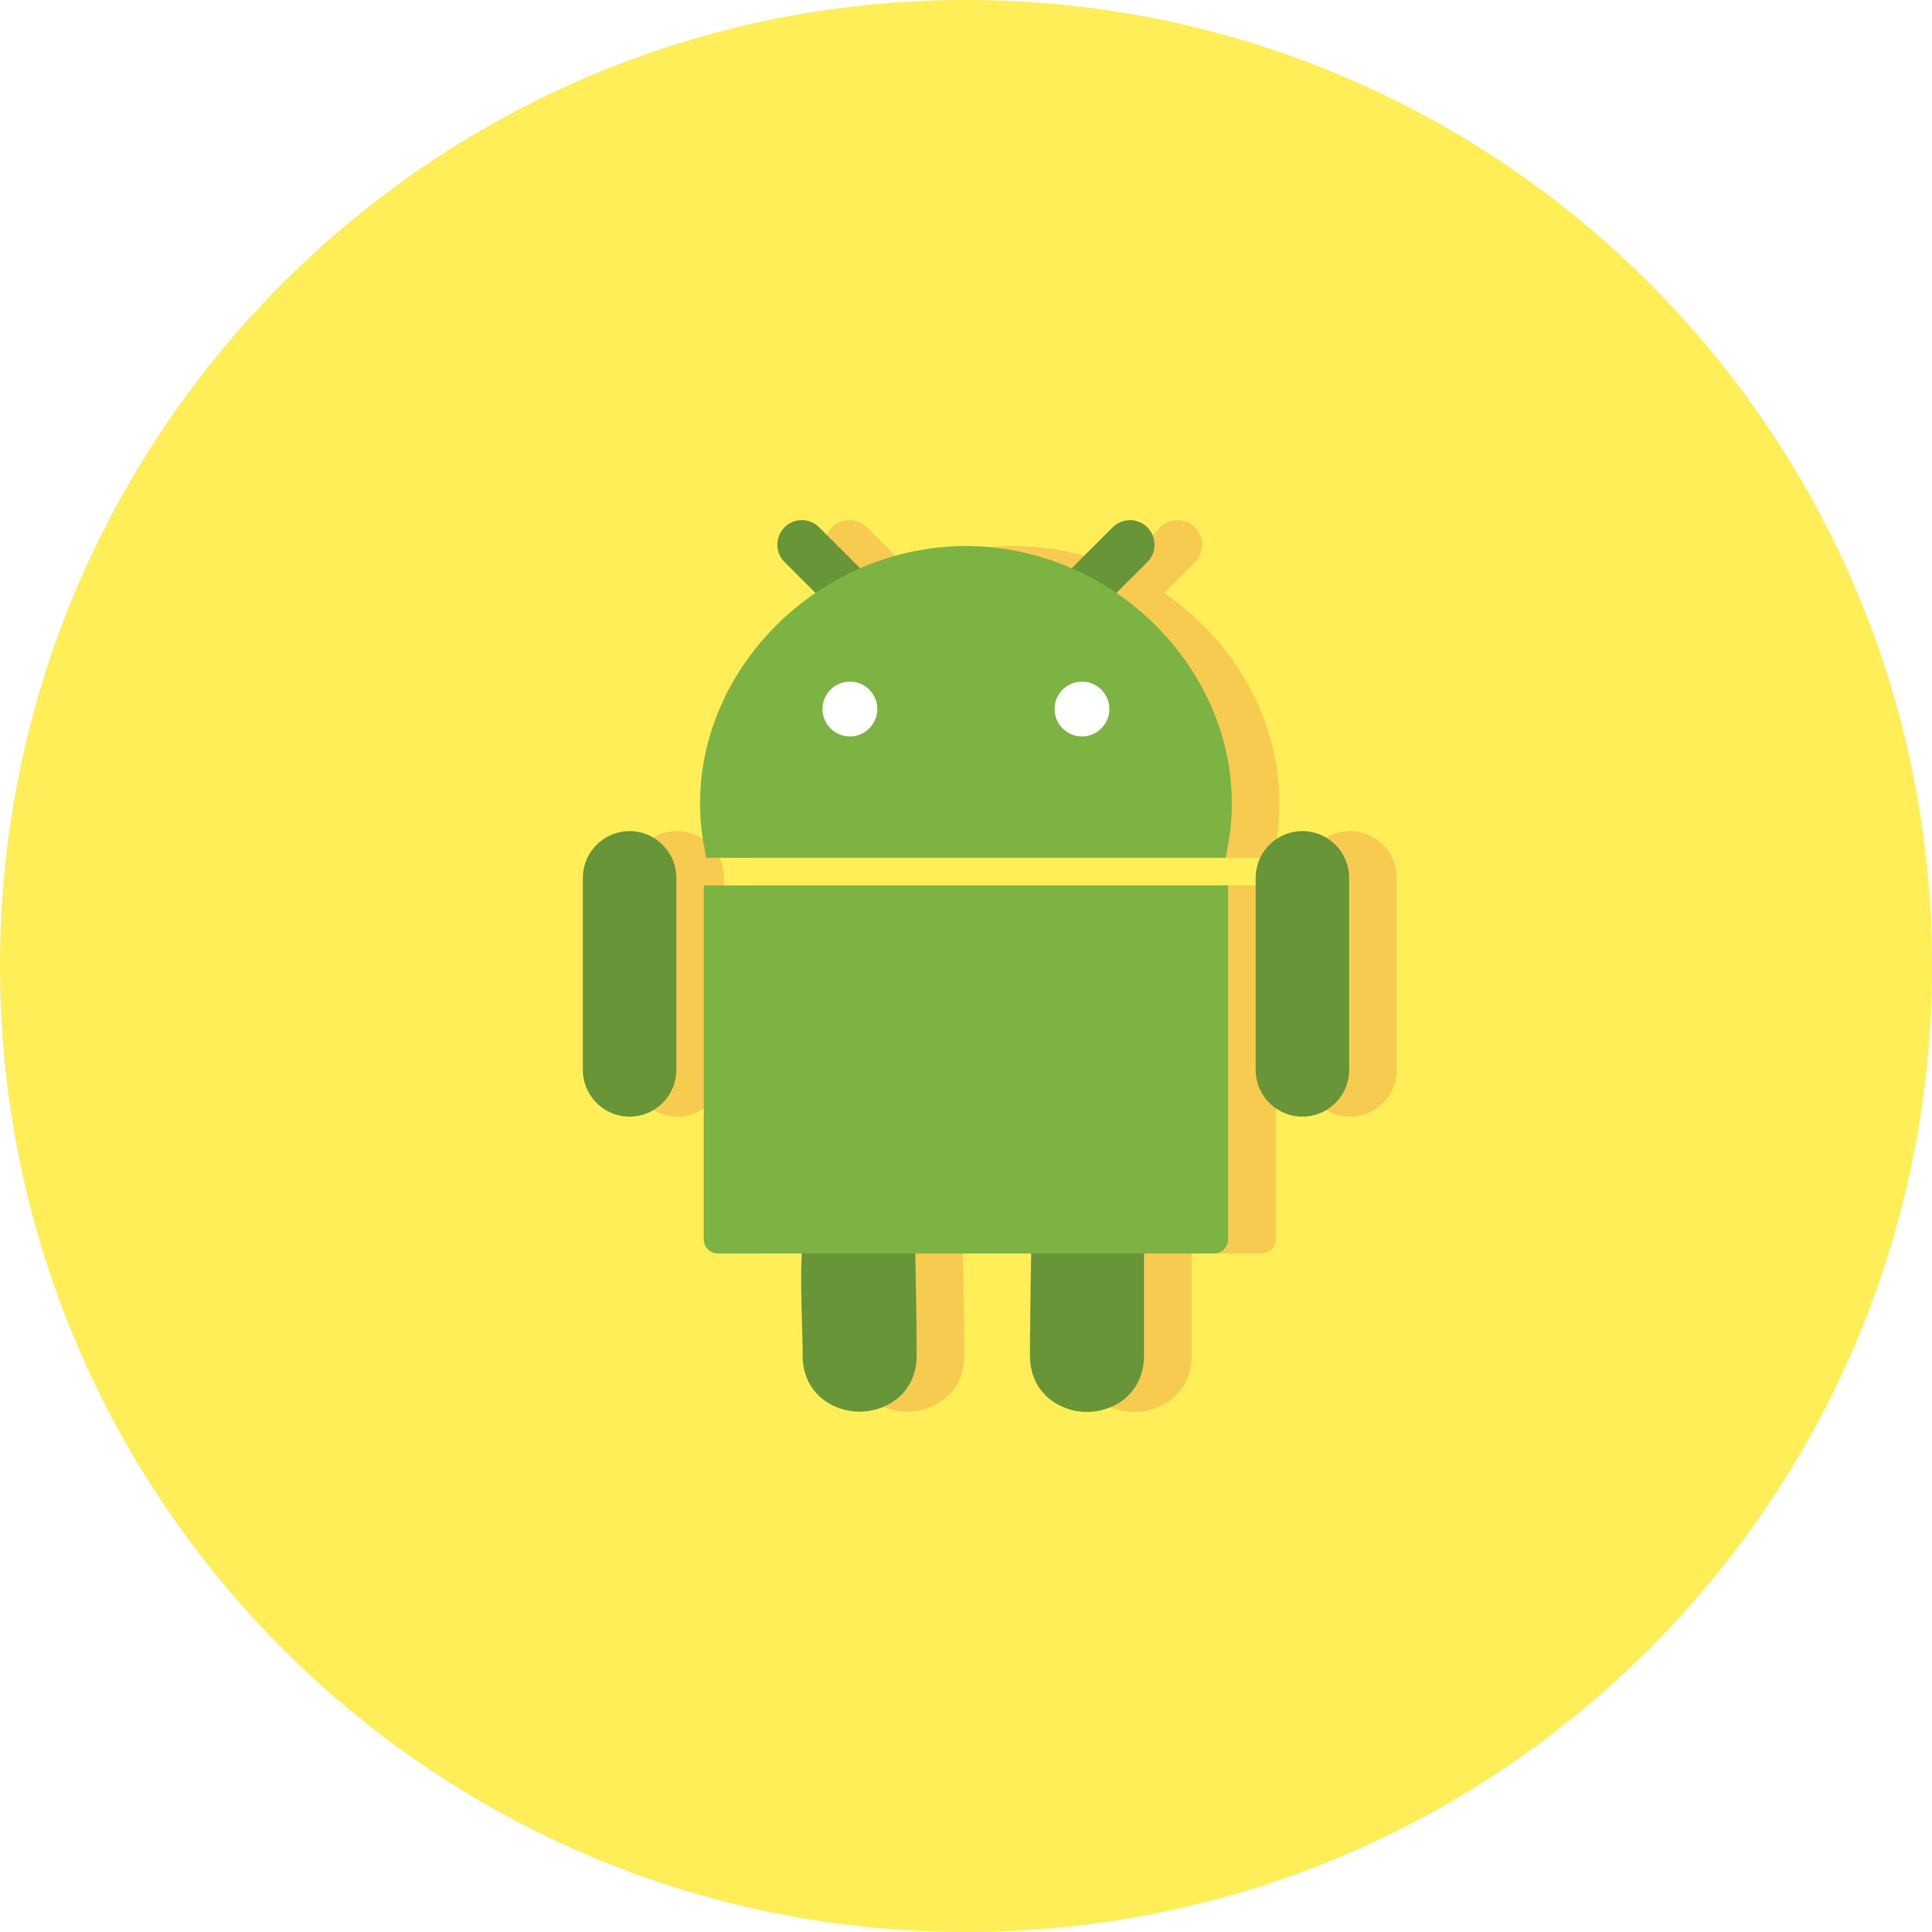 android vector td